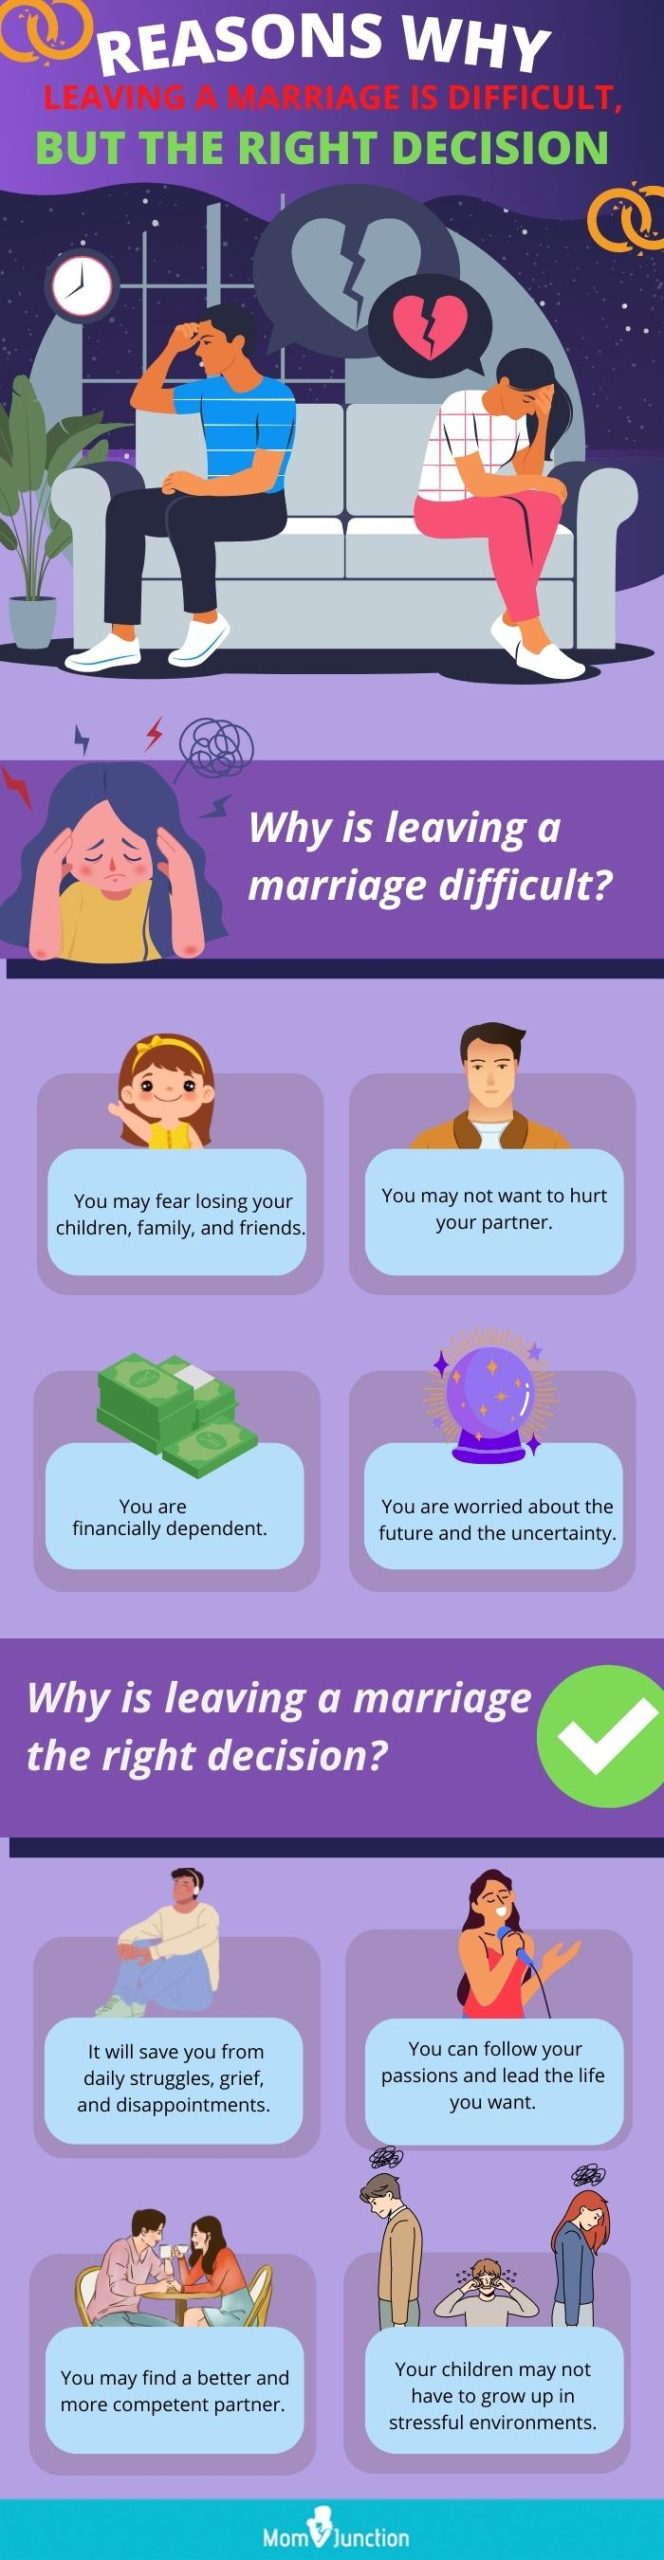 reasons why leaving a marriage is difficult, but the right decision (infographic)